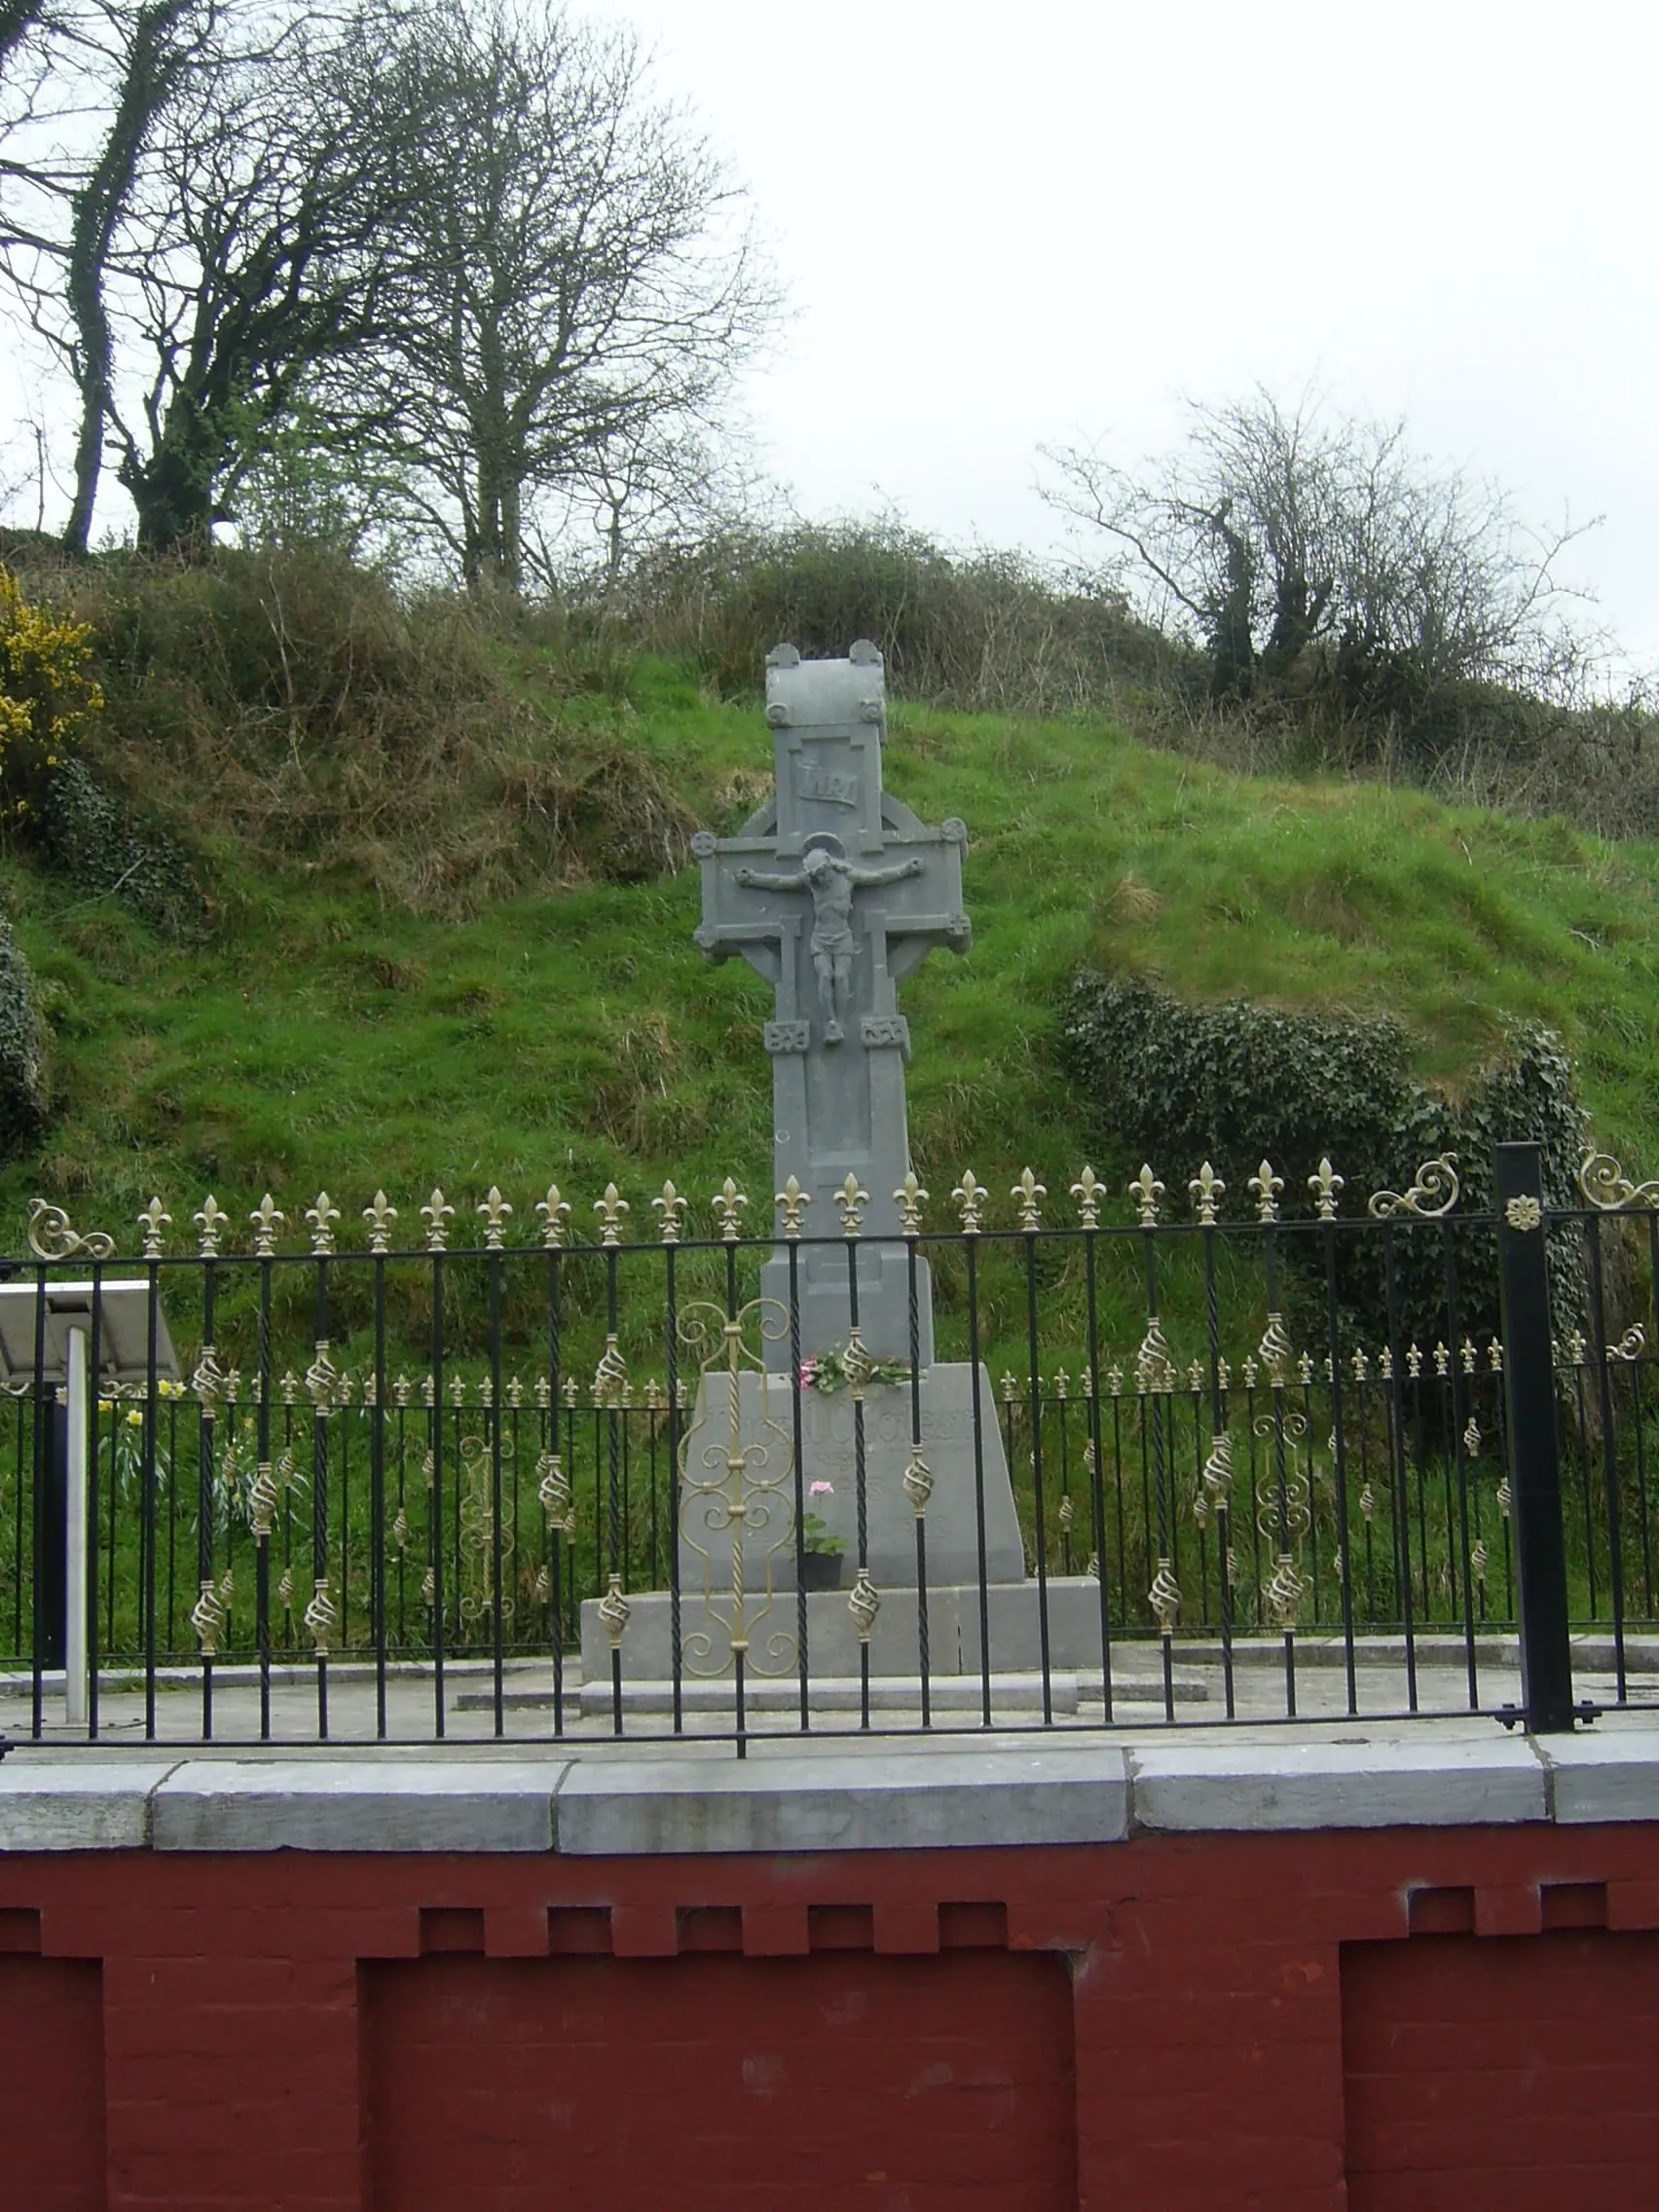 Photo showing: The Cross on the bend in the road at Béal na mBláth commemorating where Michael Collins, leader of the Irish Army, was killed in the summer of 1922.